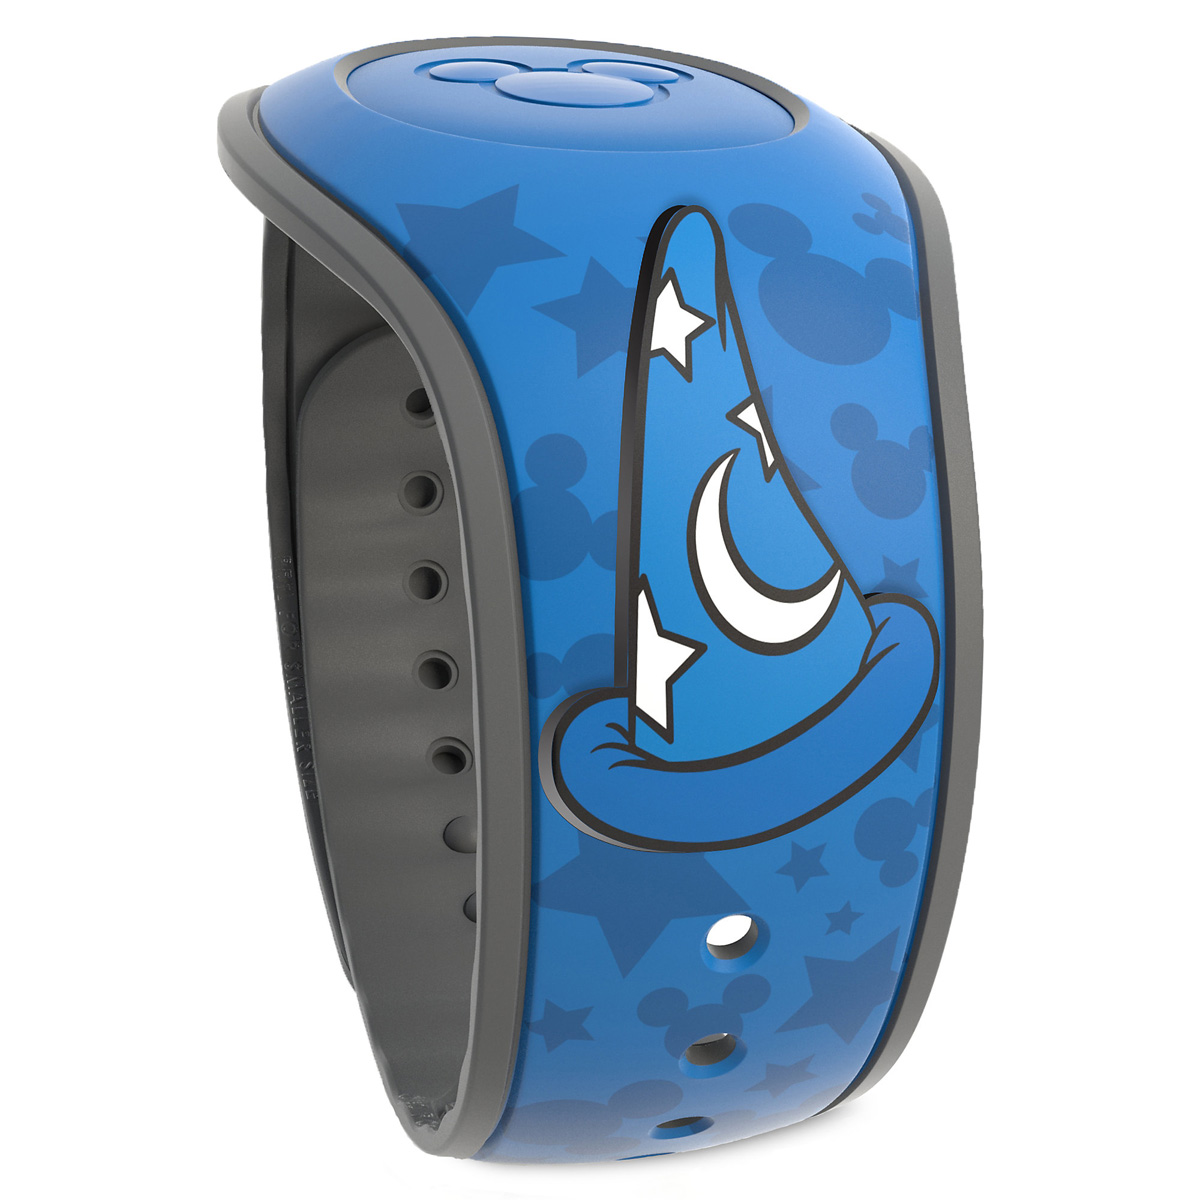 https://disneycruiselineblog.com/wp-content/uploads/2020/10/Mickey-Mouse-MagicBand-2-%E2%80%93-Wishes-Come-True-Blue-%E2%80%93-Limited-Release.jpg